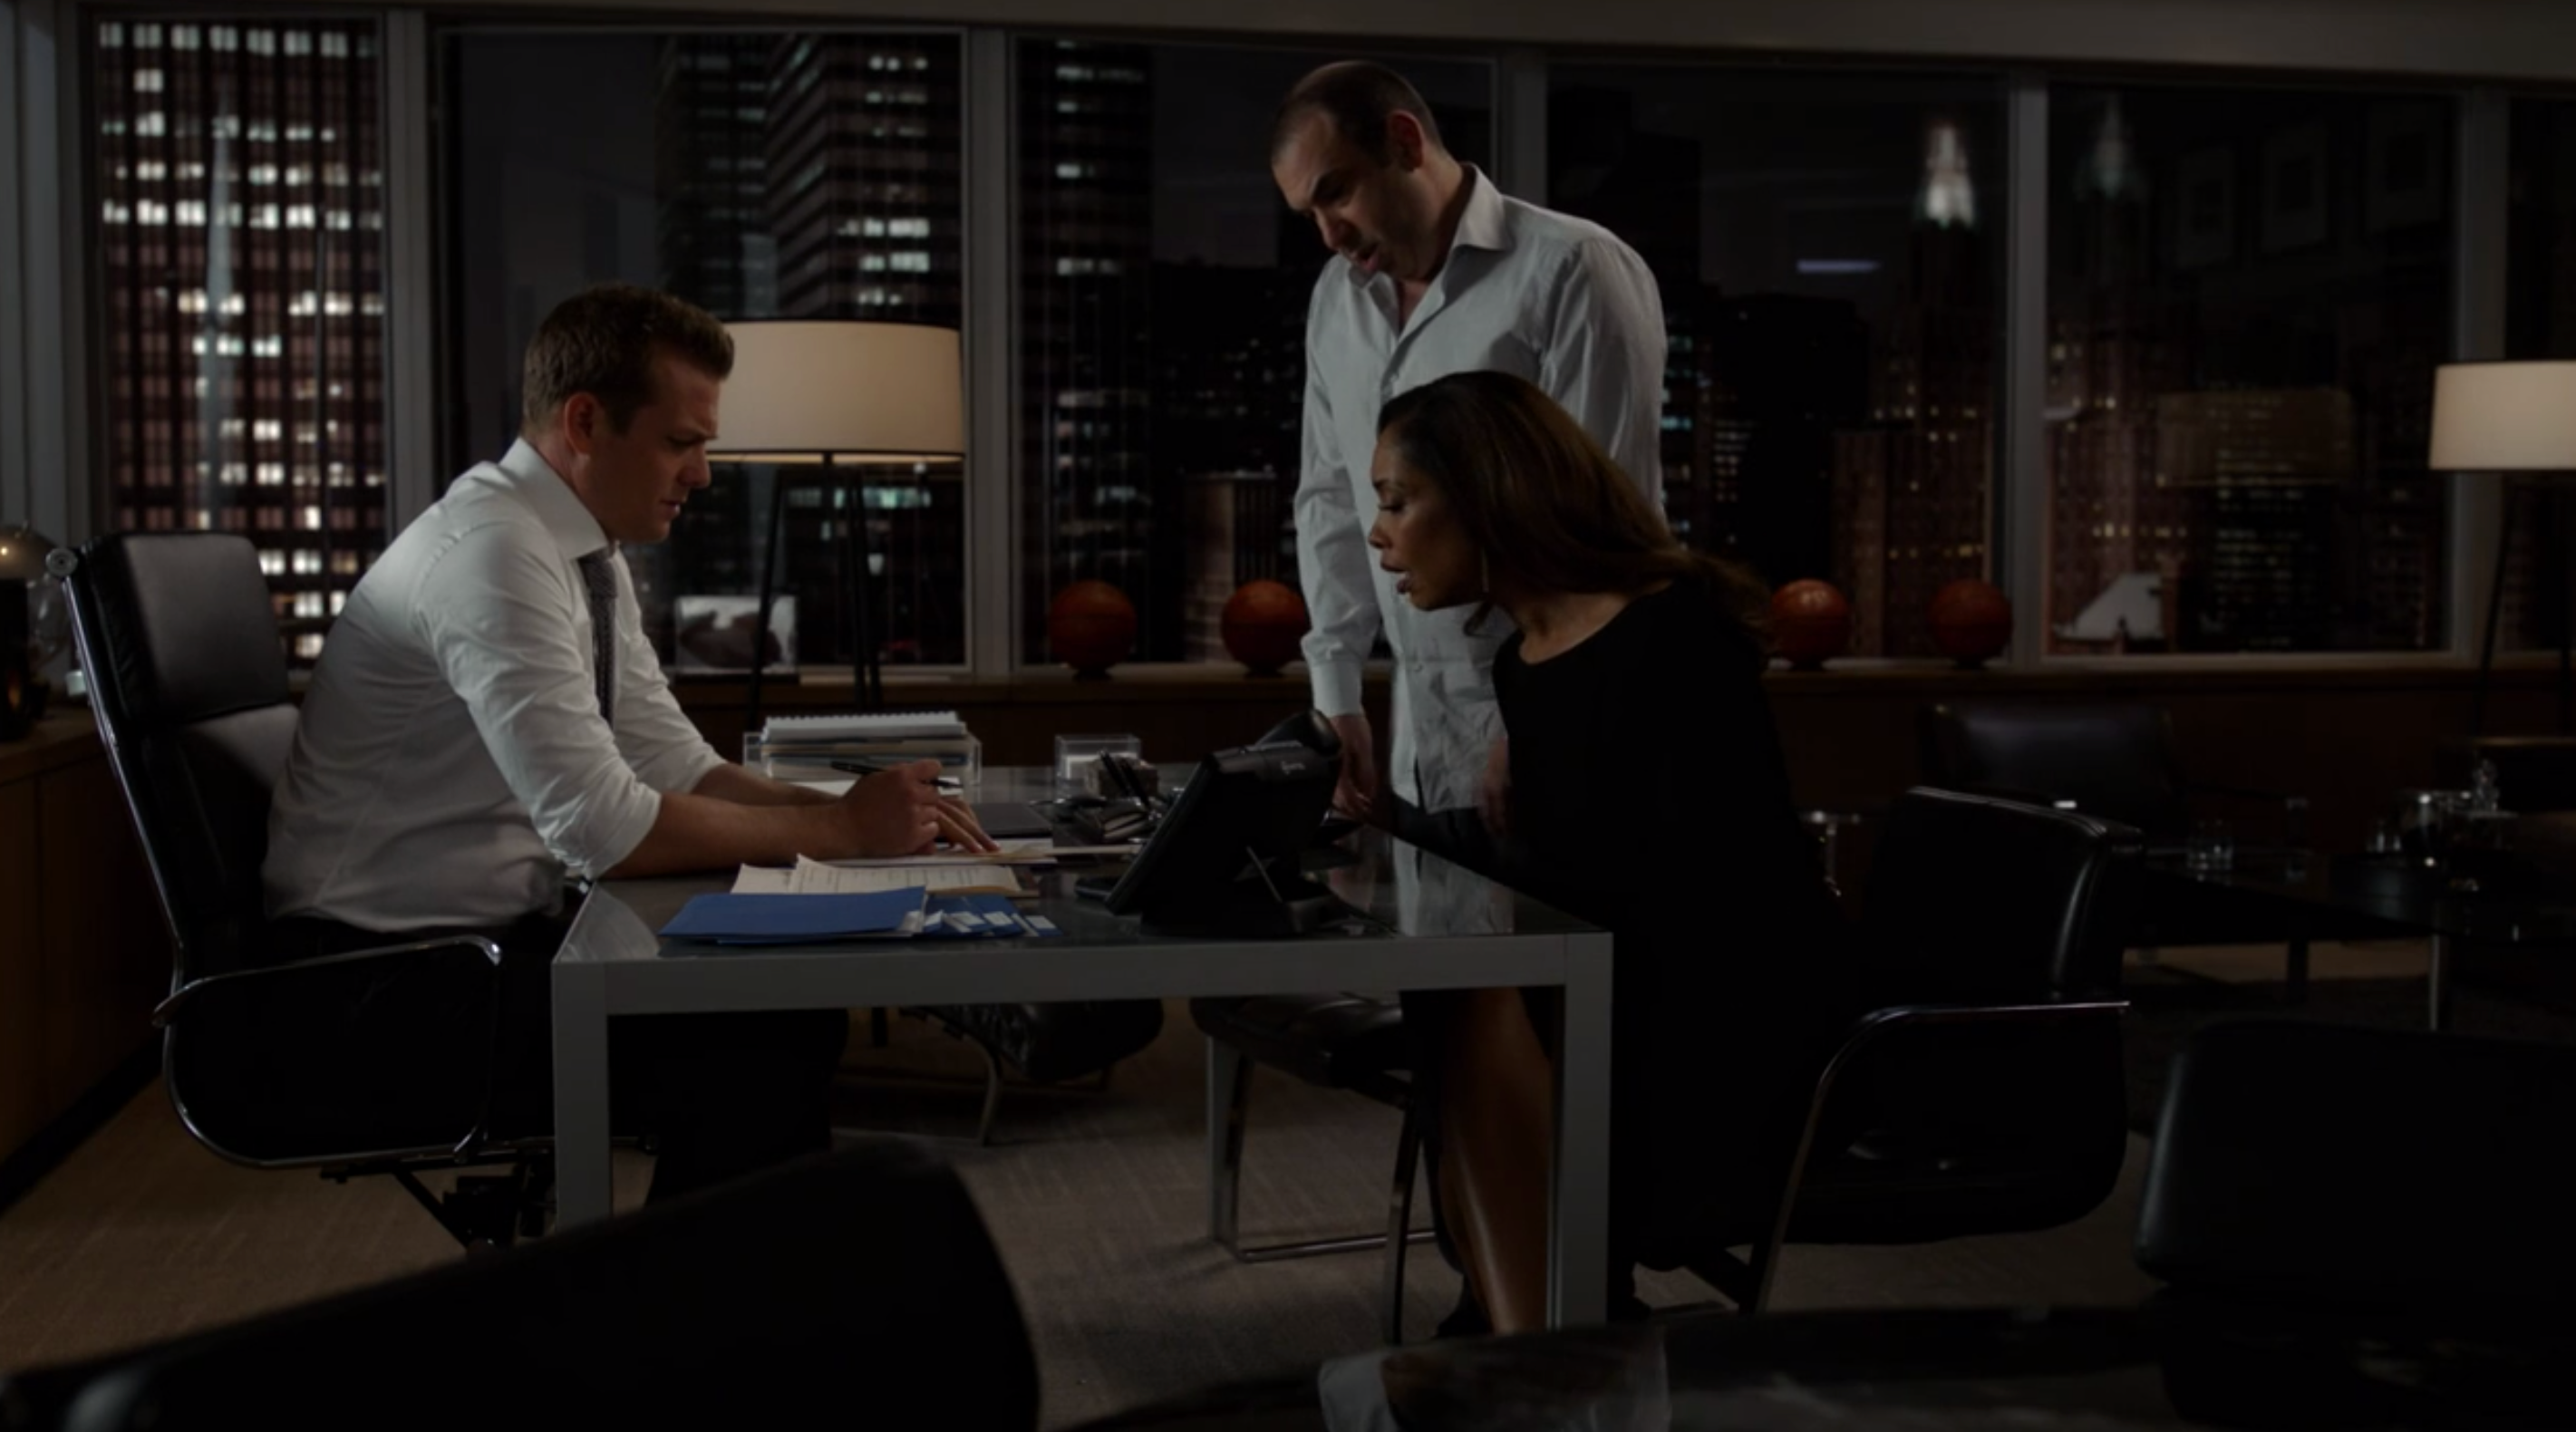 SUITS TV Series S06E01 Louis Litt Net Worth Note Prop to Harvey Specter and Jessica Pearson